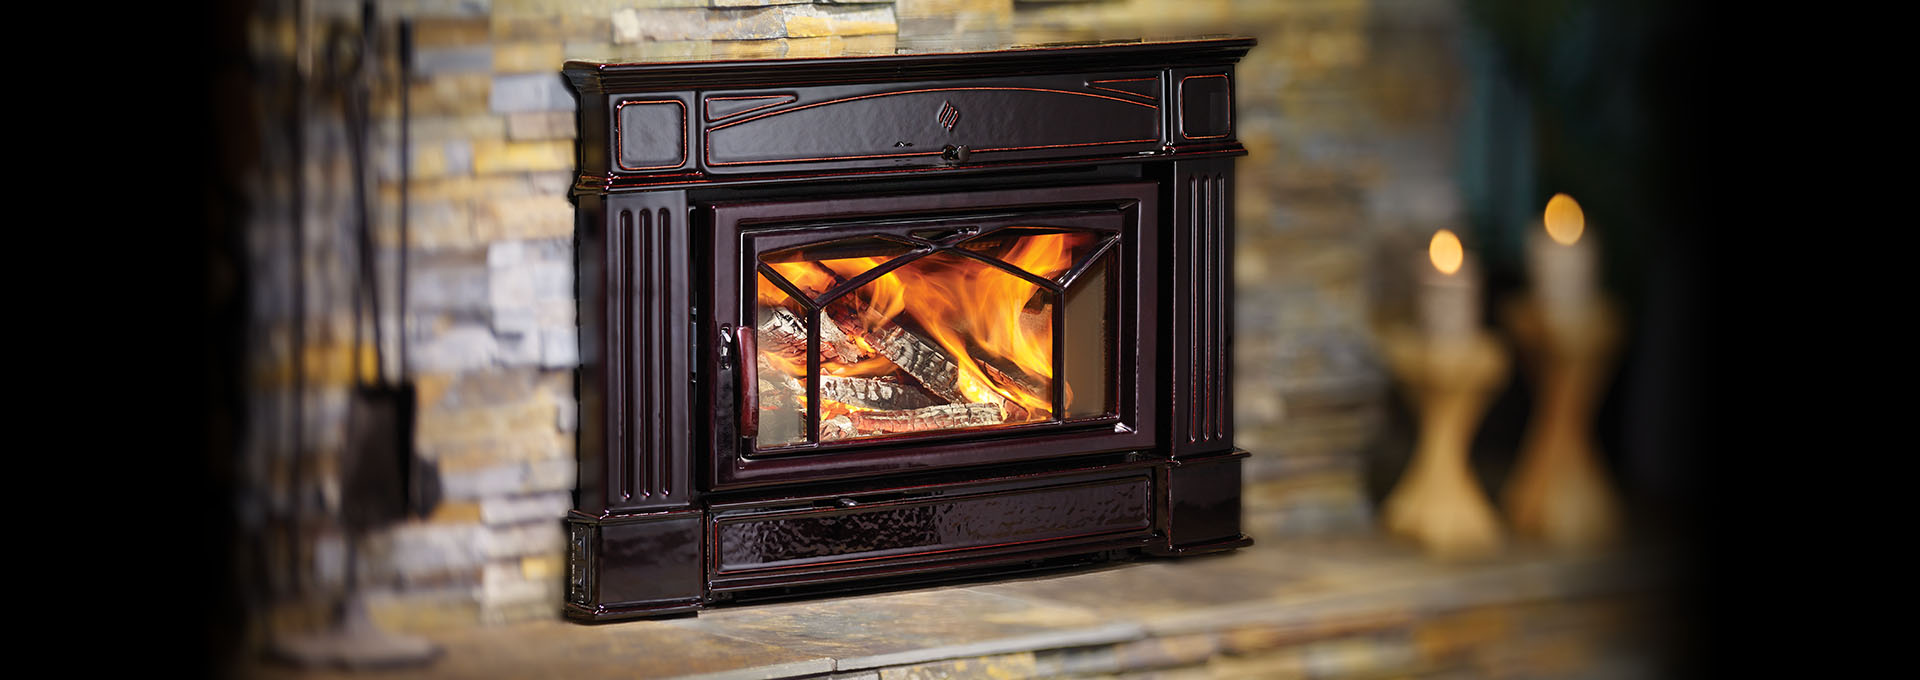 Natural Gas Fireplace Heater Best Of Wood Inserts Epa Certified